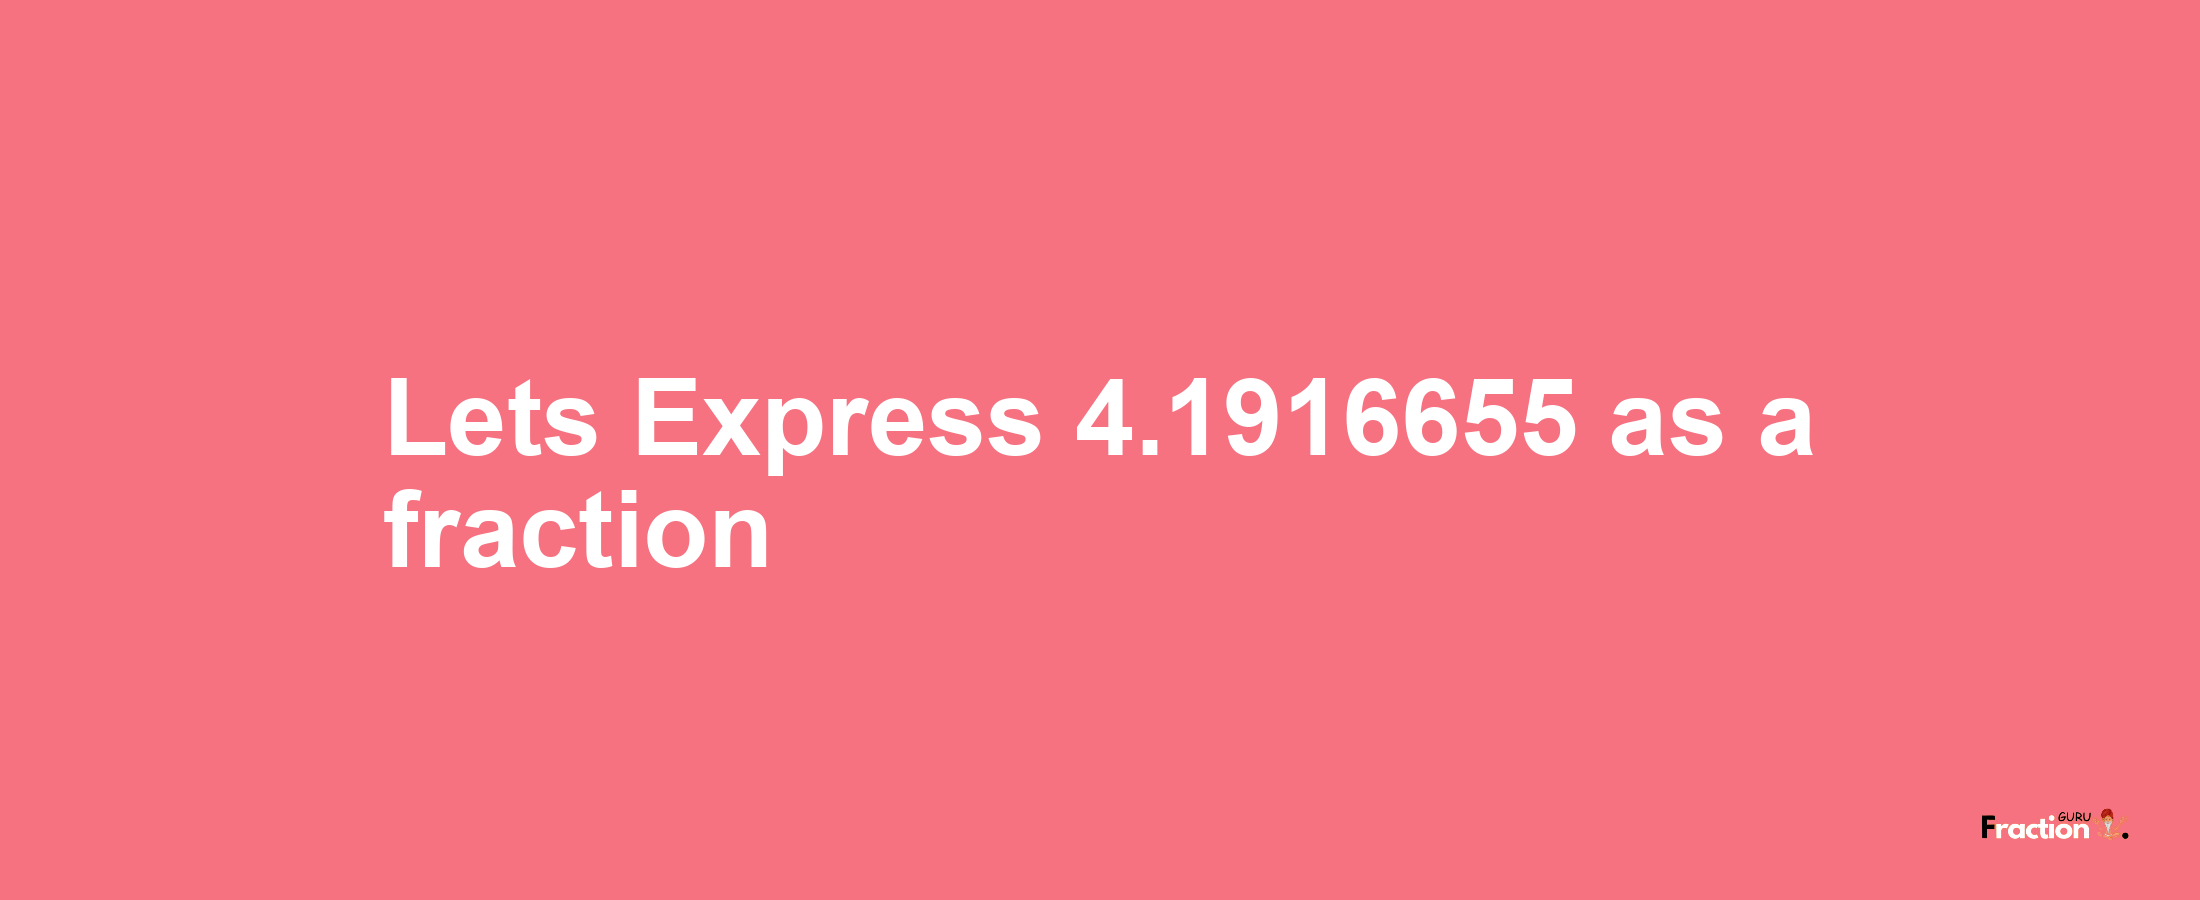 Lets Express 4.1916655 as afraction